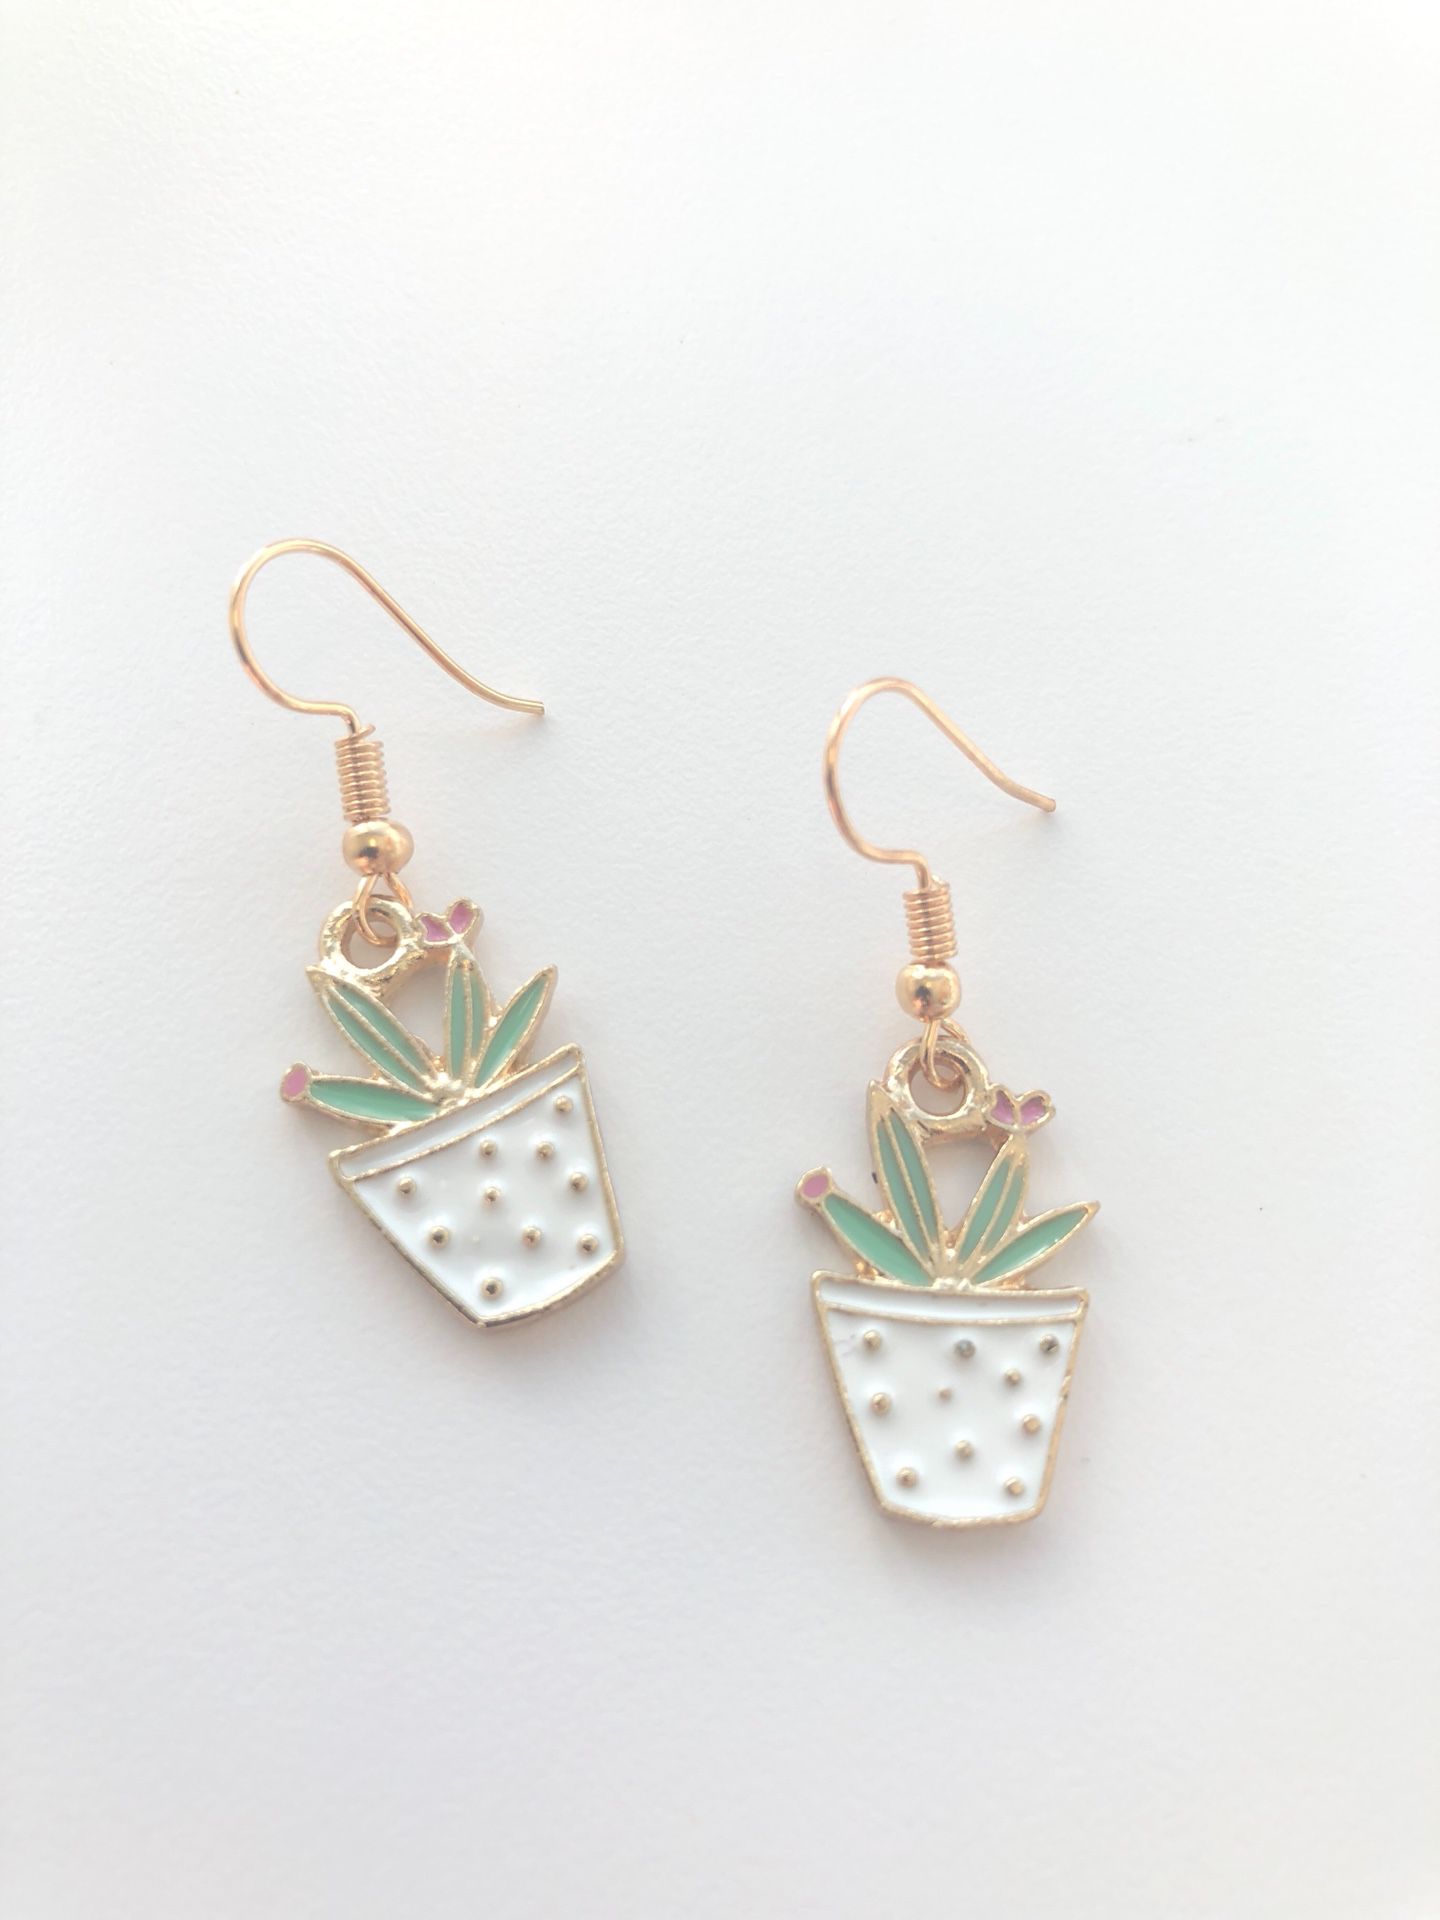 New succulents cacti earrings